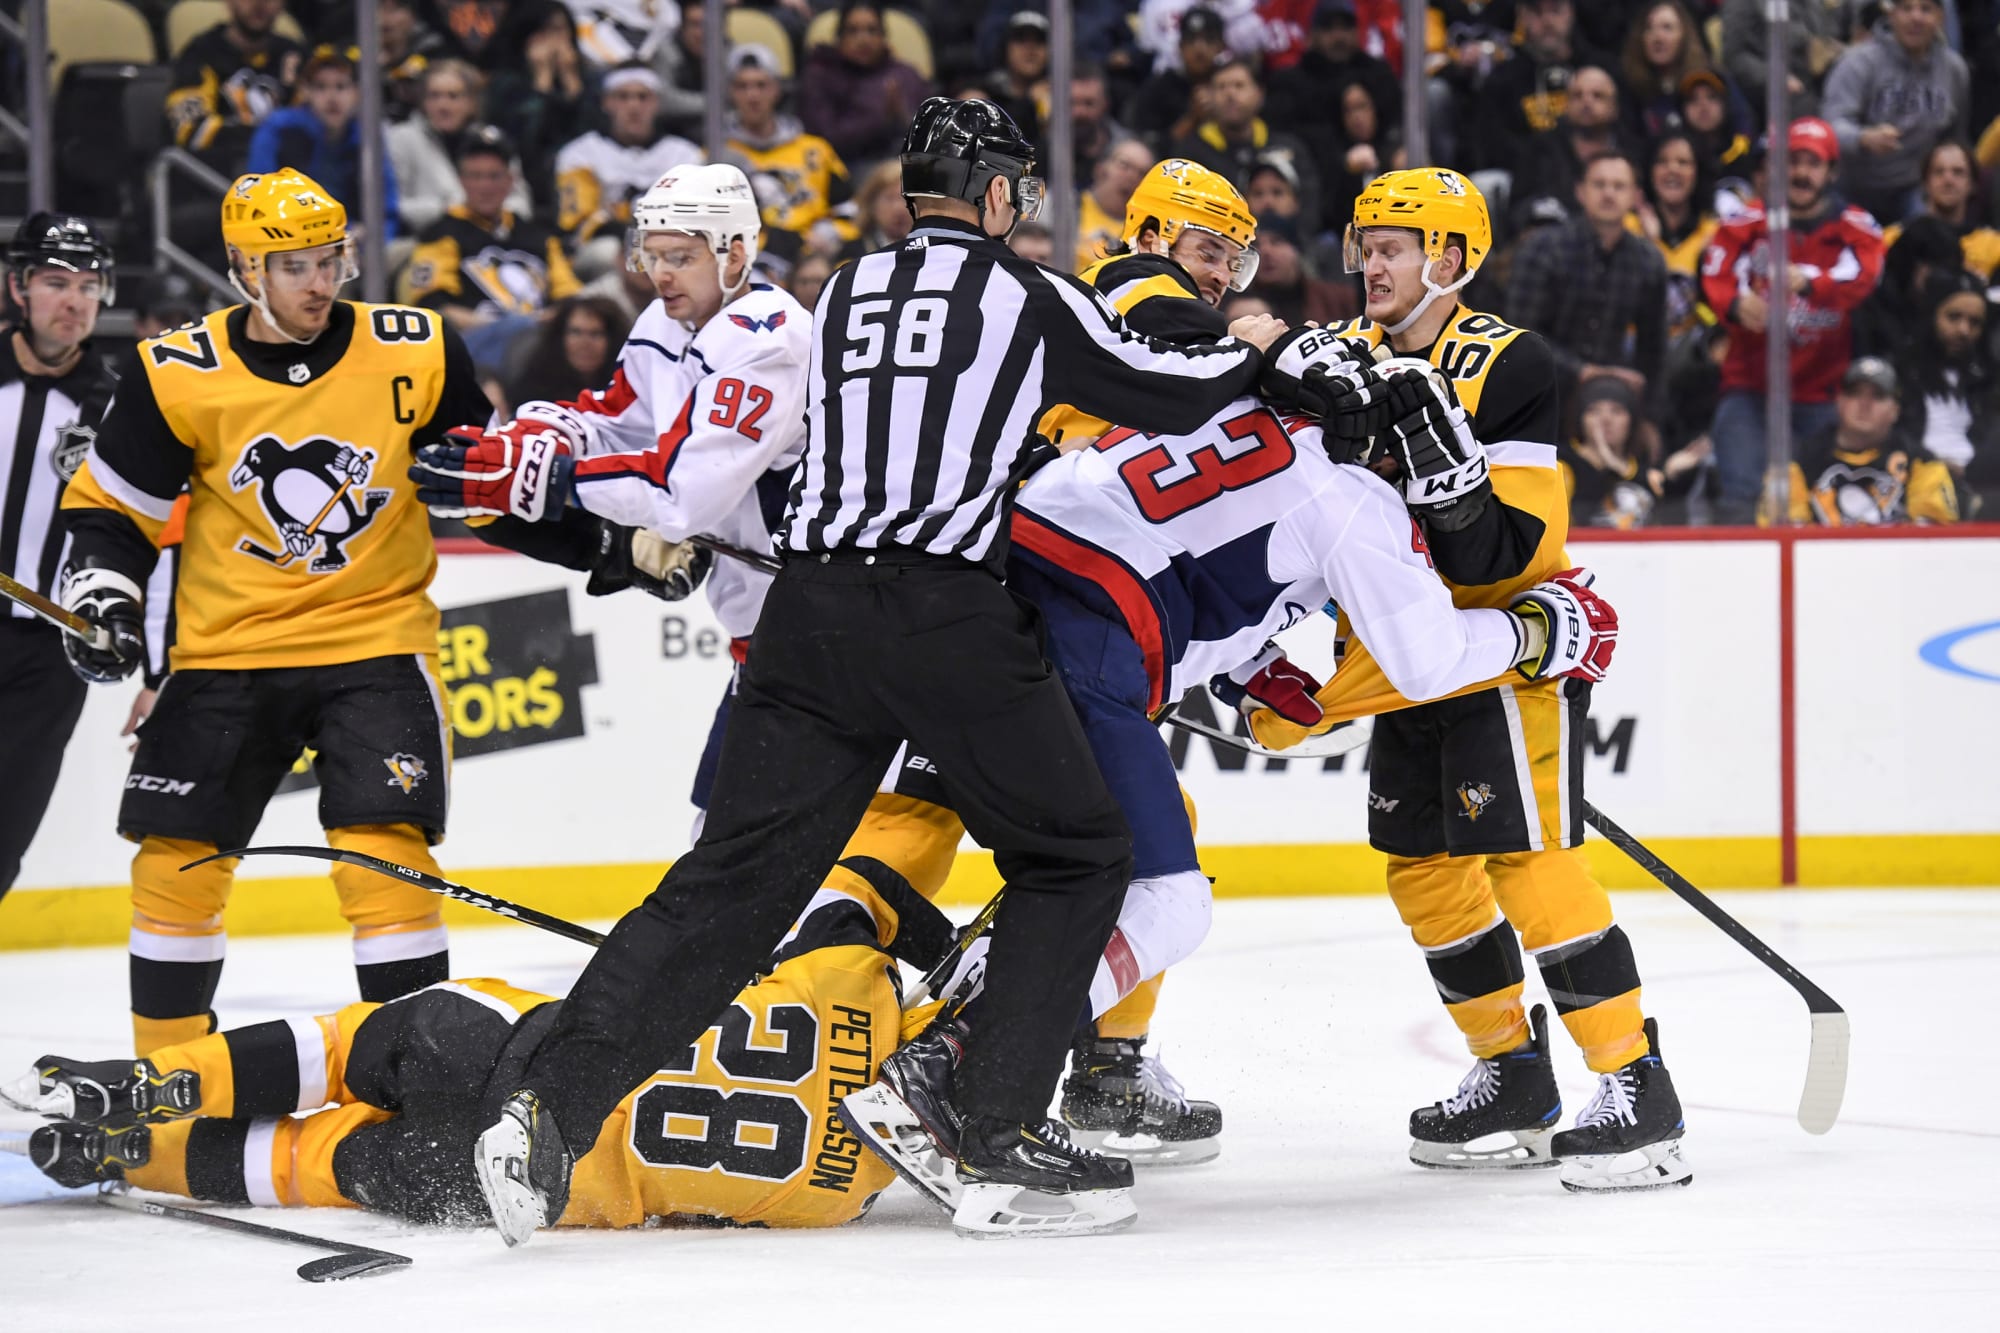 Sidney Crosby was asked about Tom Wilson's latest questionable hit